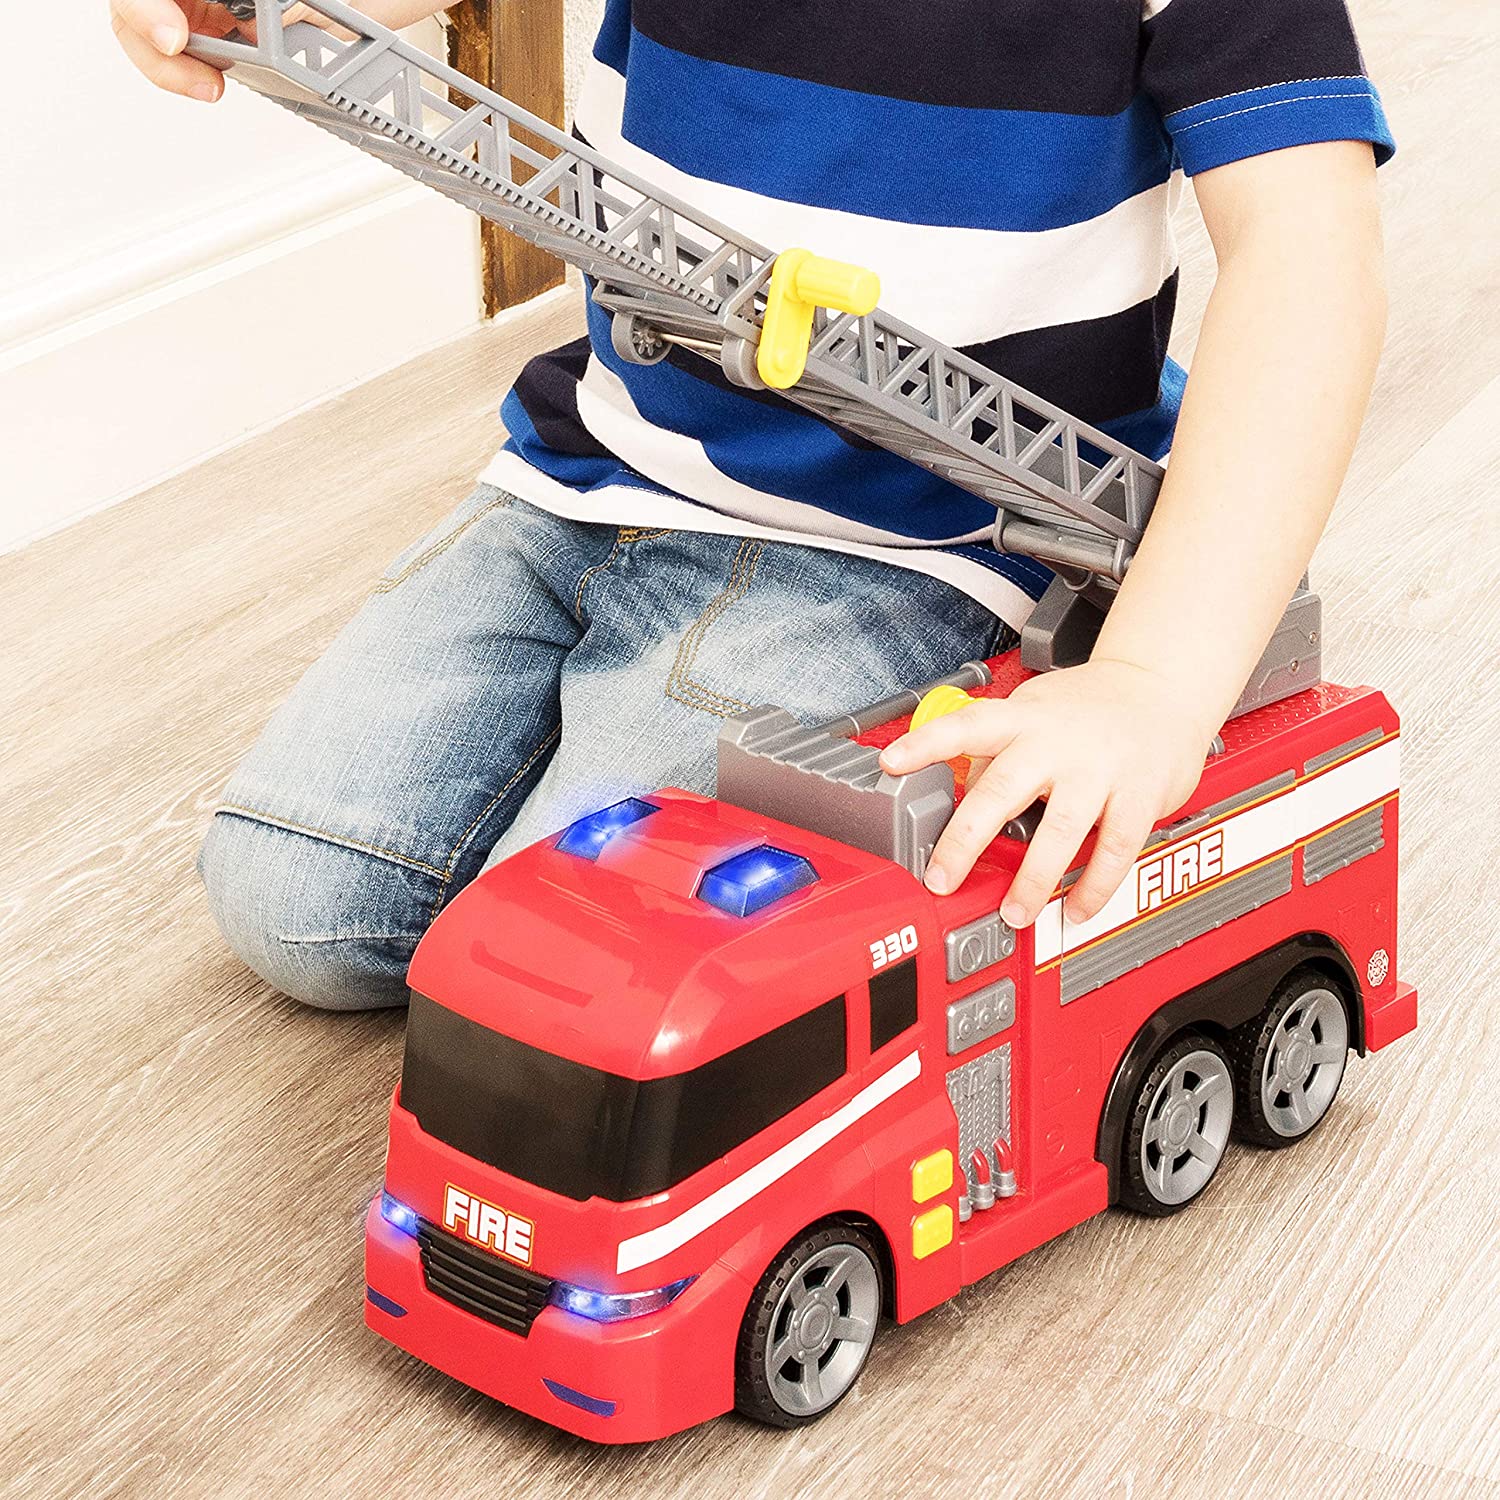 Teamsterz Emergency Vehicle Light and Sound Die Cast Fire Engine Truck Kids Toy 